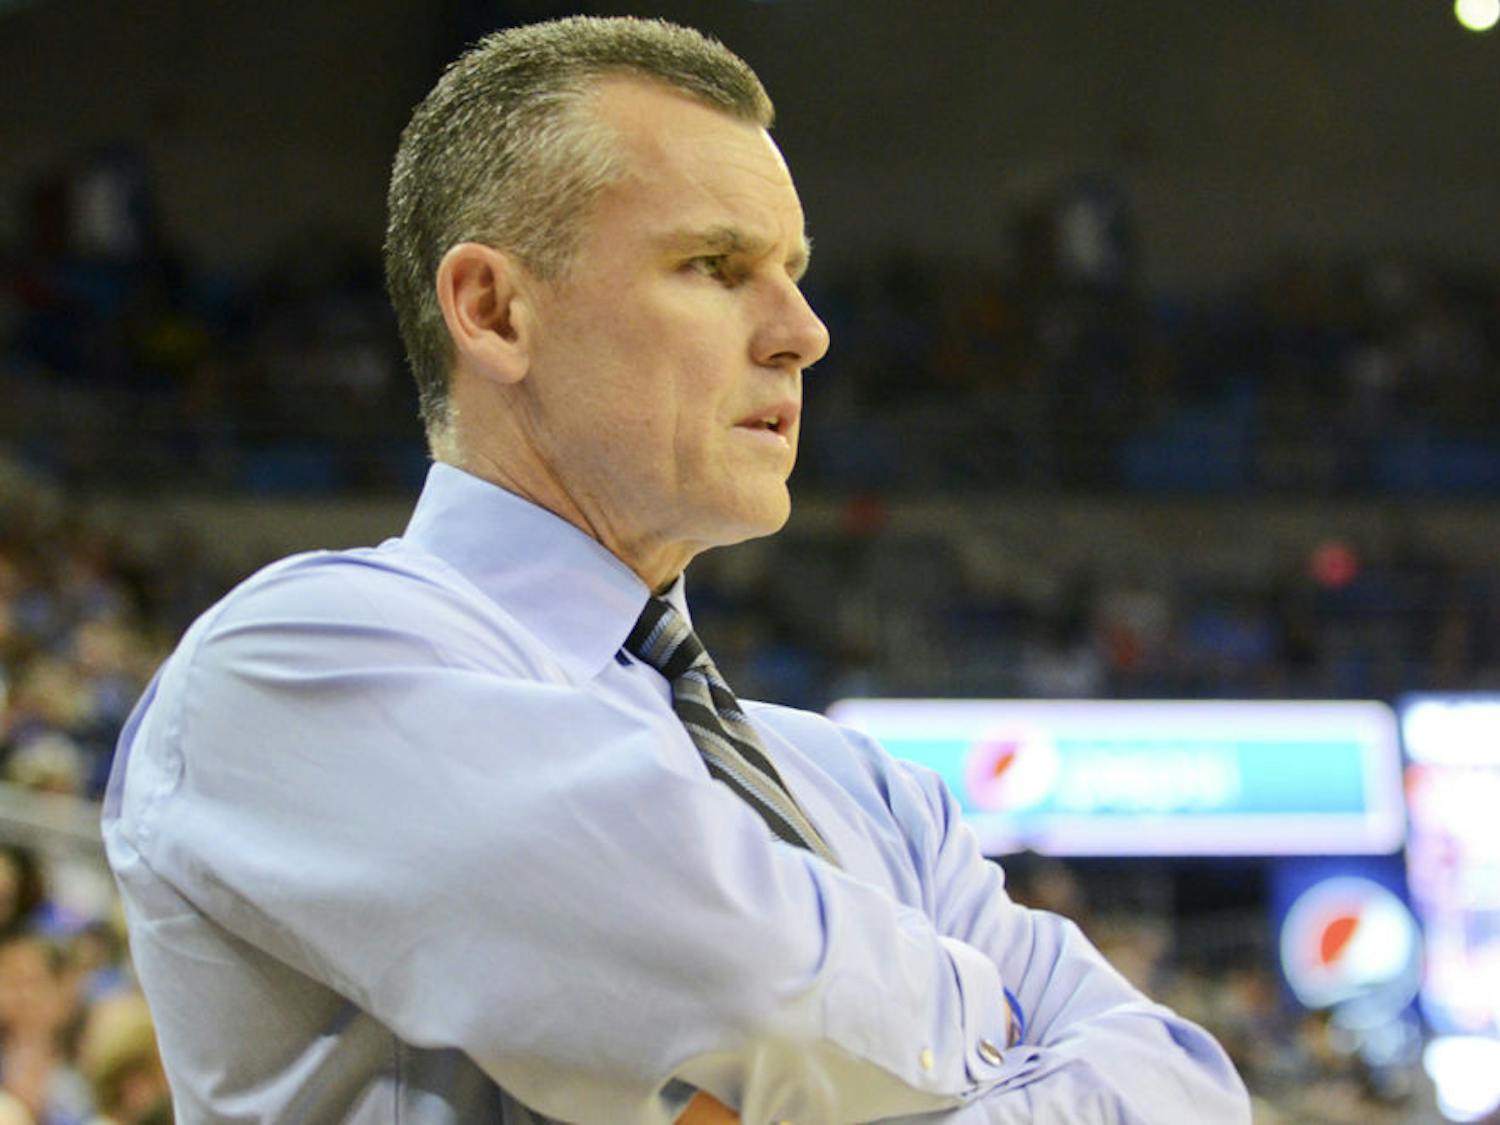 Billy Donovan looks down the court during Florida's 72-47 win against Mississippi State on Jan. 10 in the O'Connell Center. Florida dropped its first SEC home game when on Tuesday, losing 79-61 to LSU.